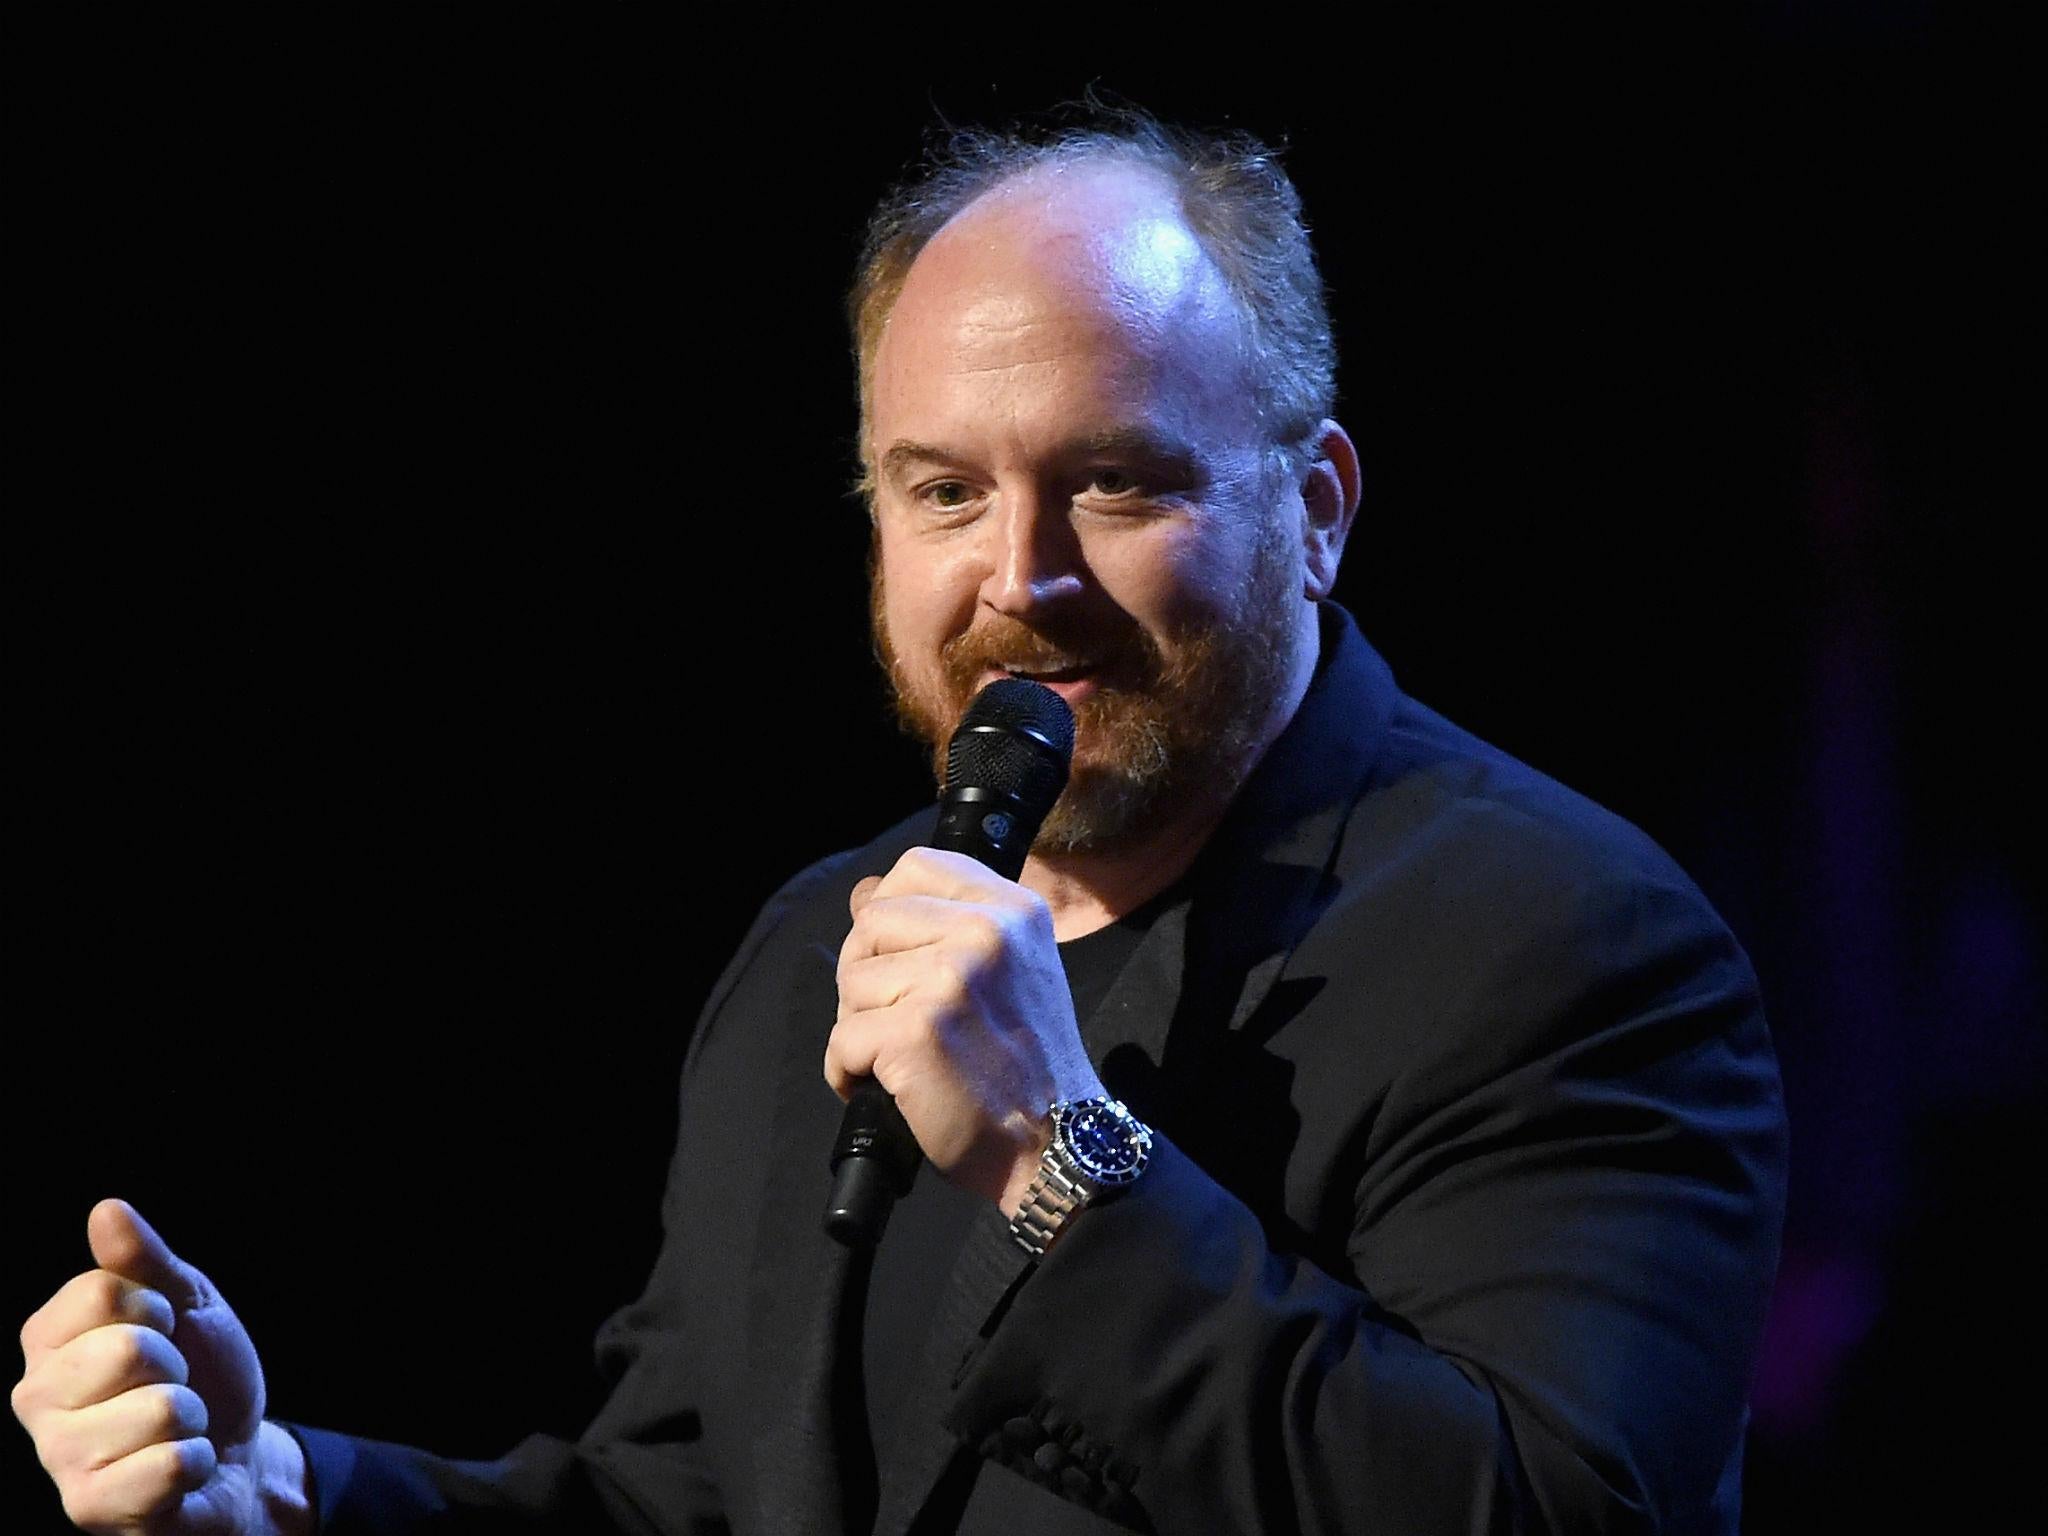 Louis CK gets ‘standing ovation’ at first comedy show since admitting sexual misconduct | The ...